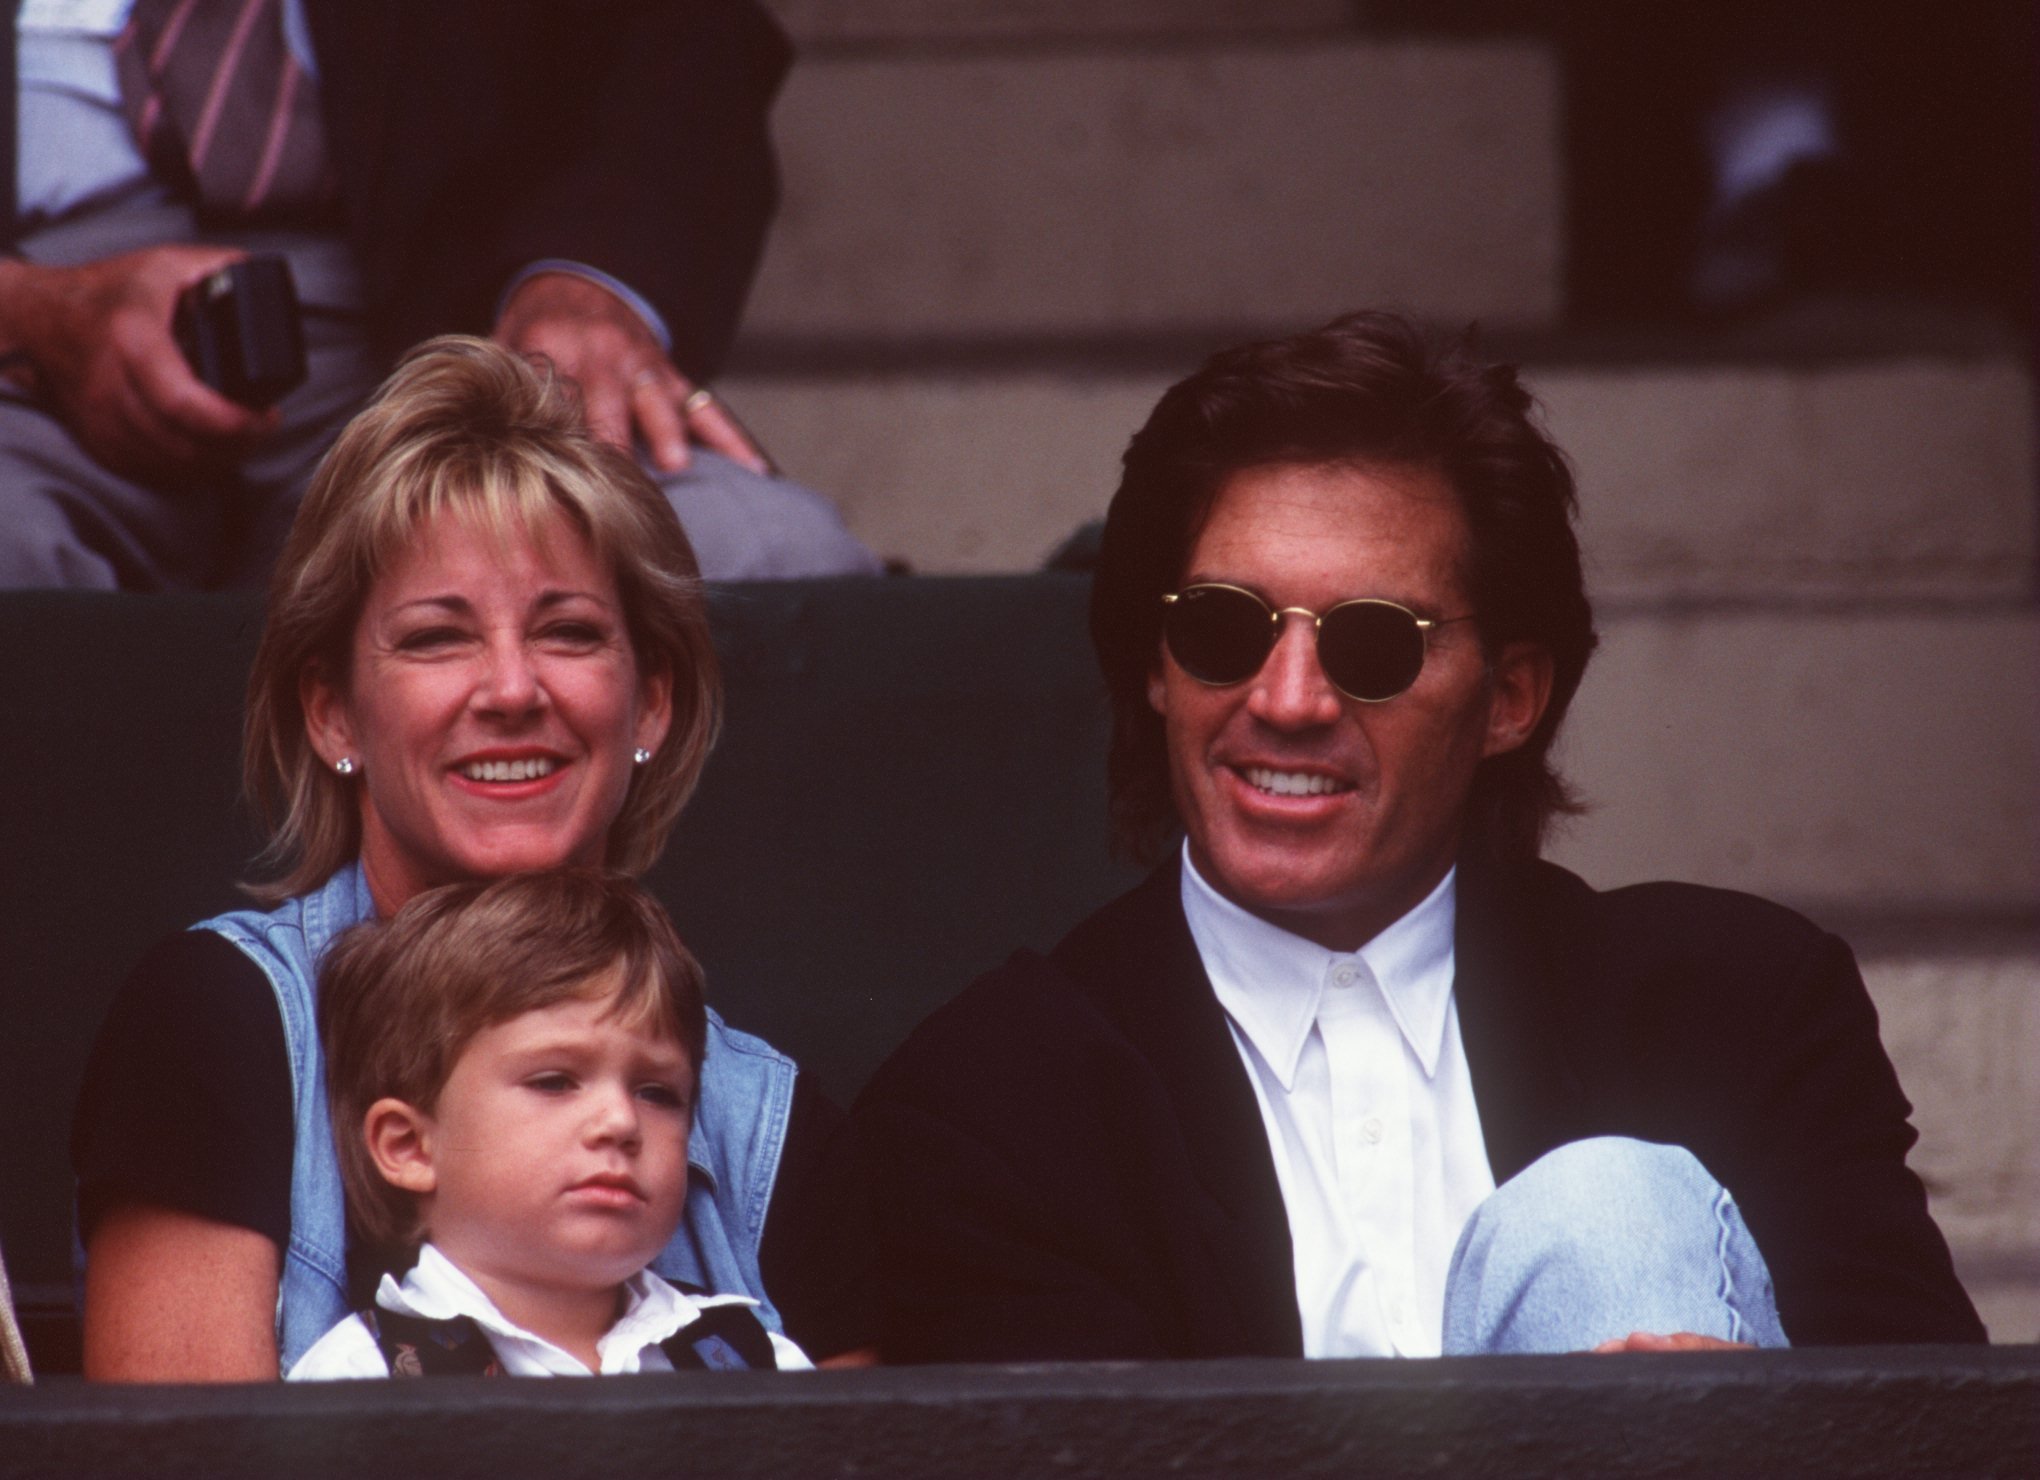 Chris Evert during the men's quarter finals at Wimbledon with Andy Mills and young son on 5 Jul 1995. | Source: Getty Images